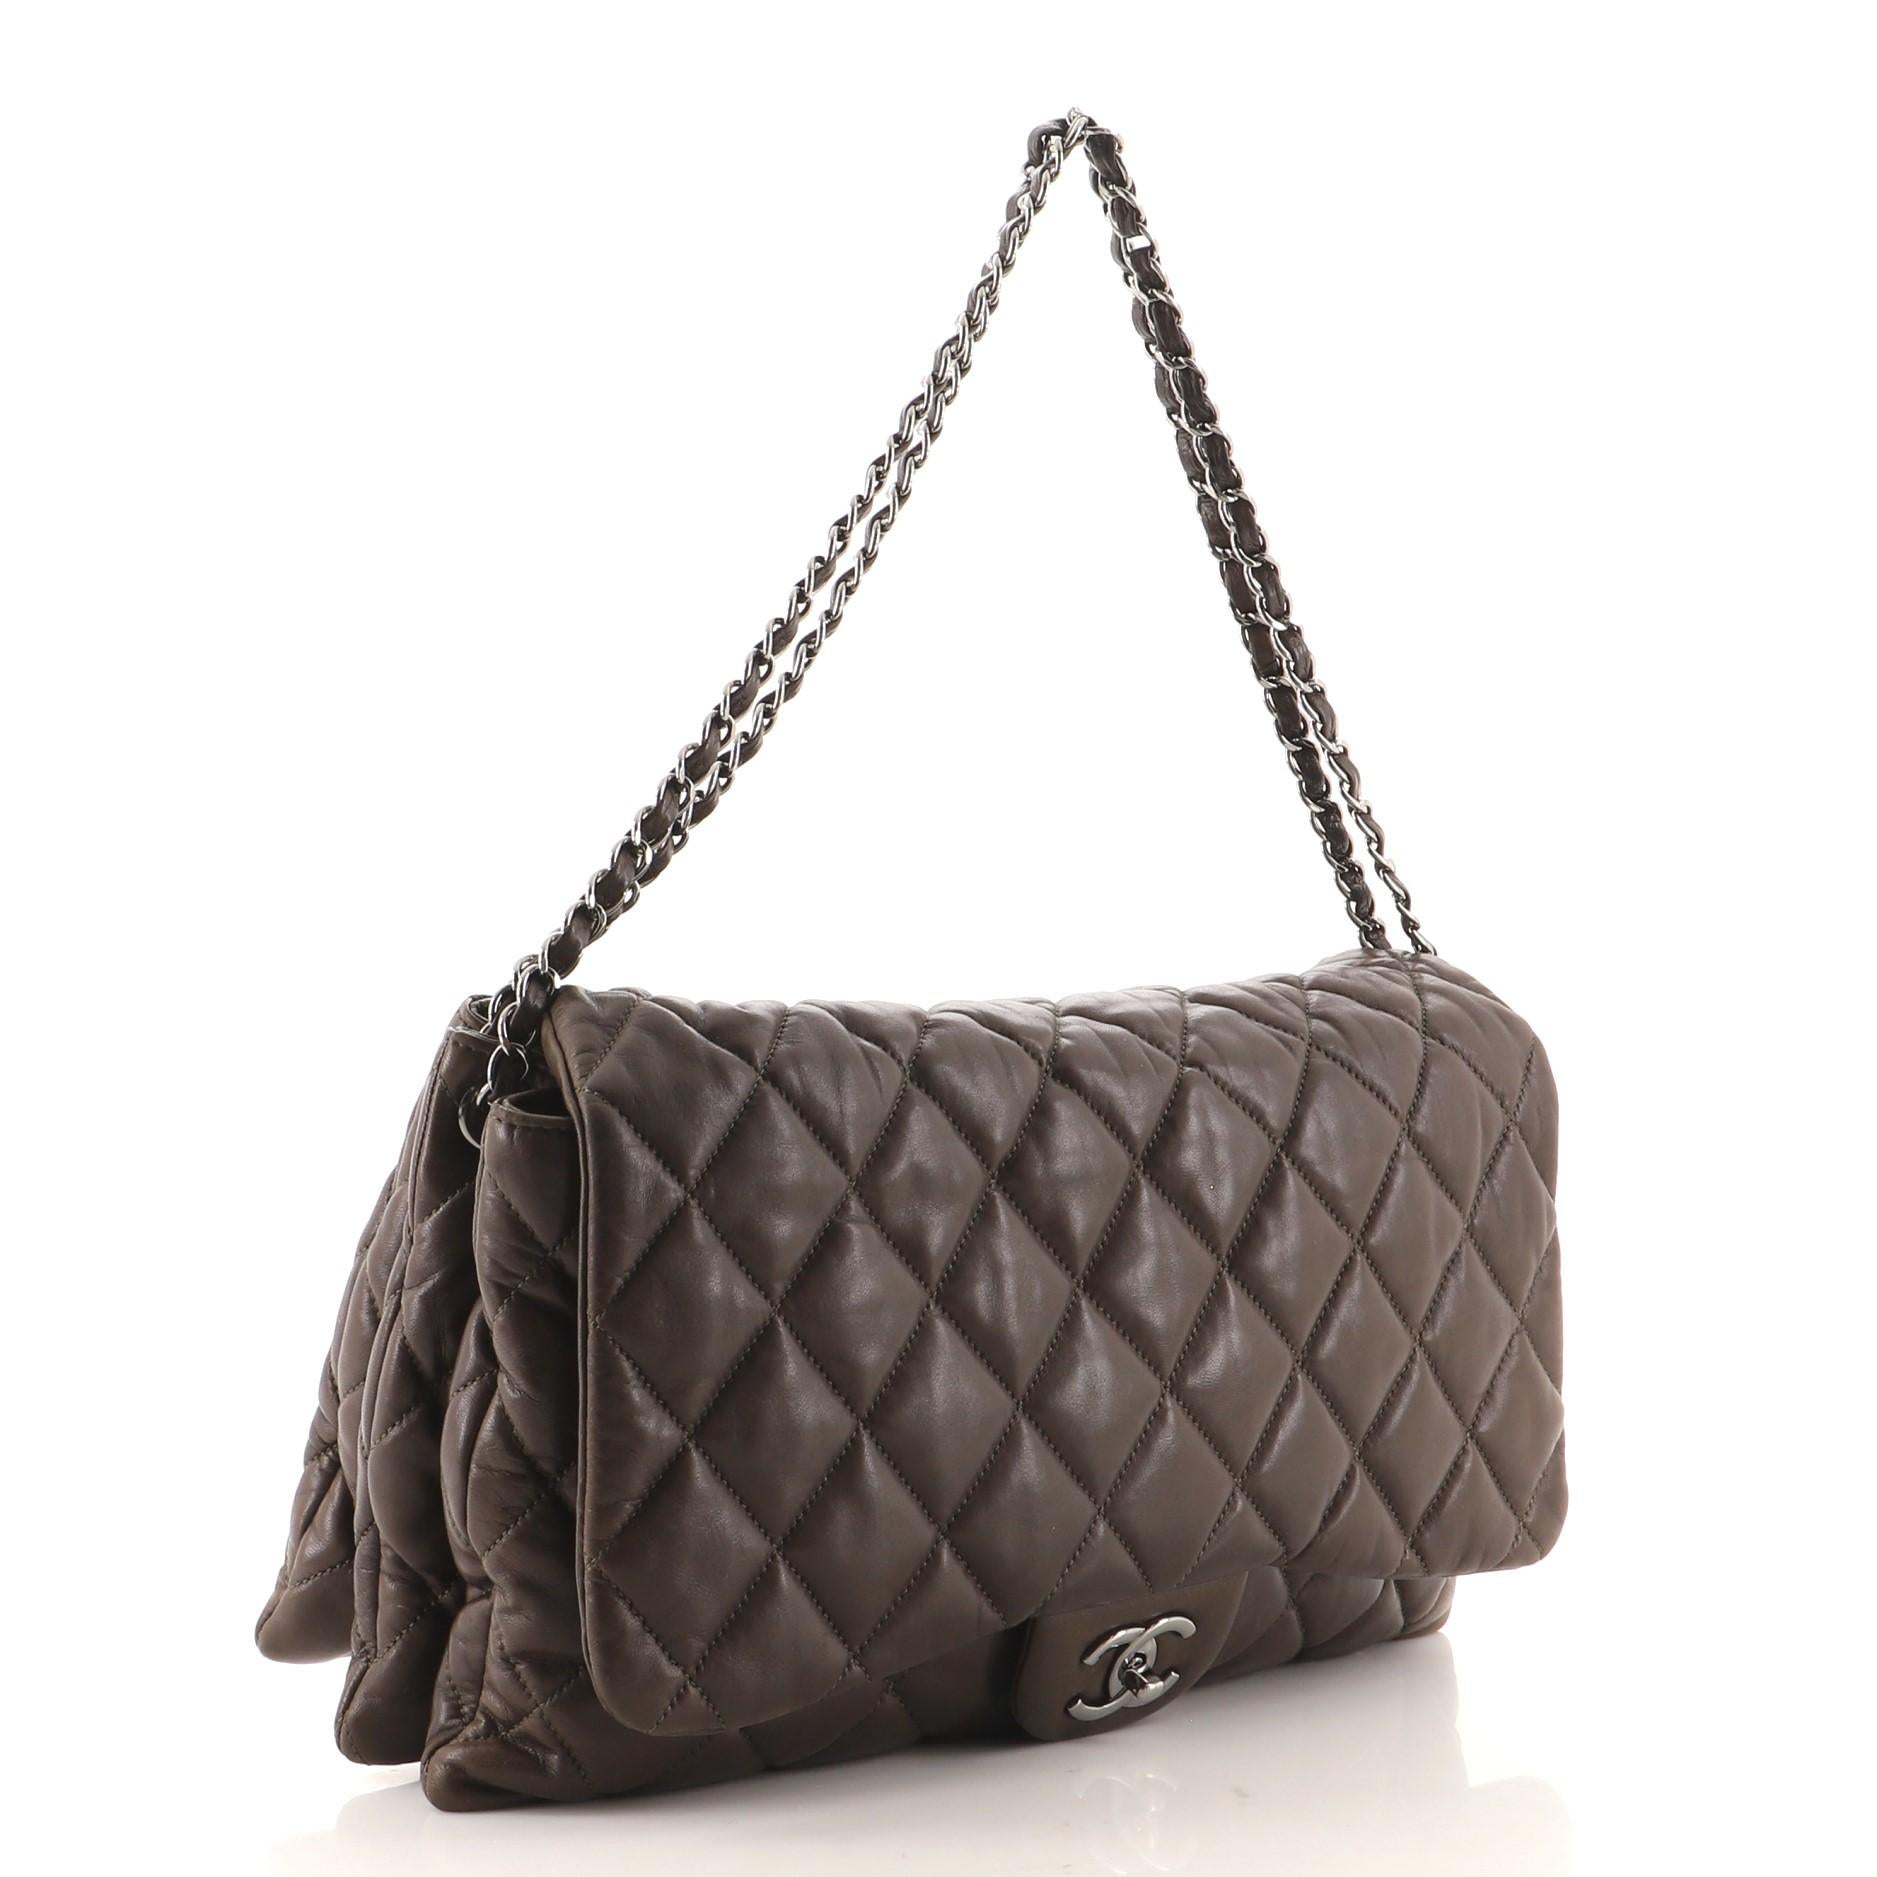 Black Chanel 3 Flap Bag Quilted Lambskin Maxi